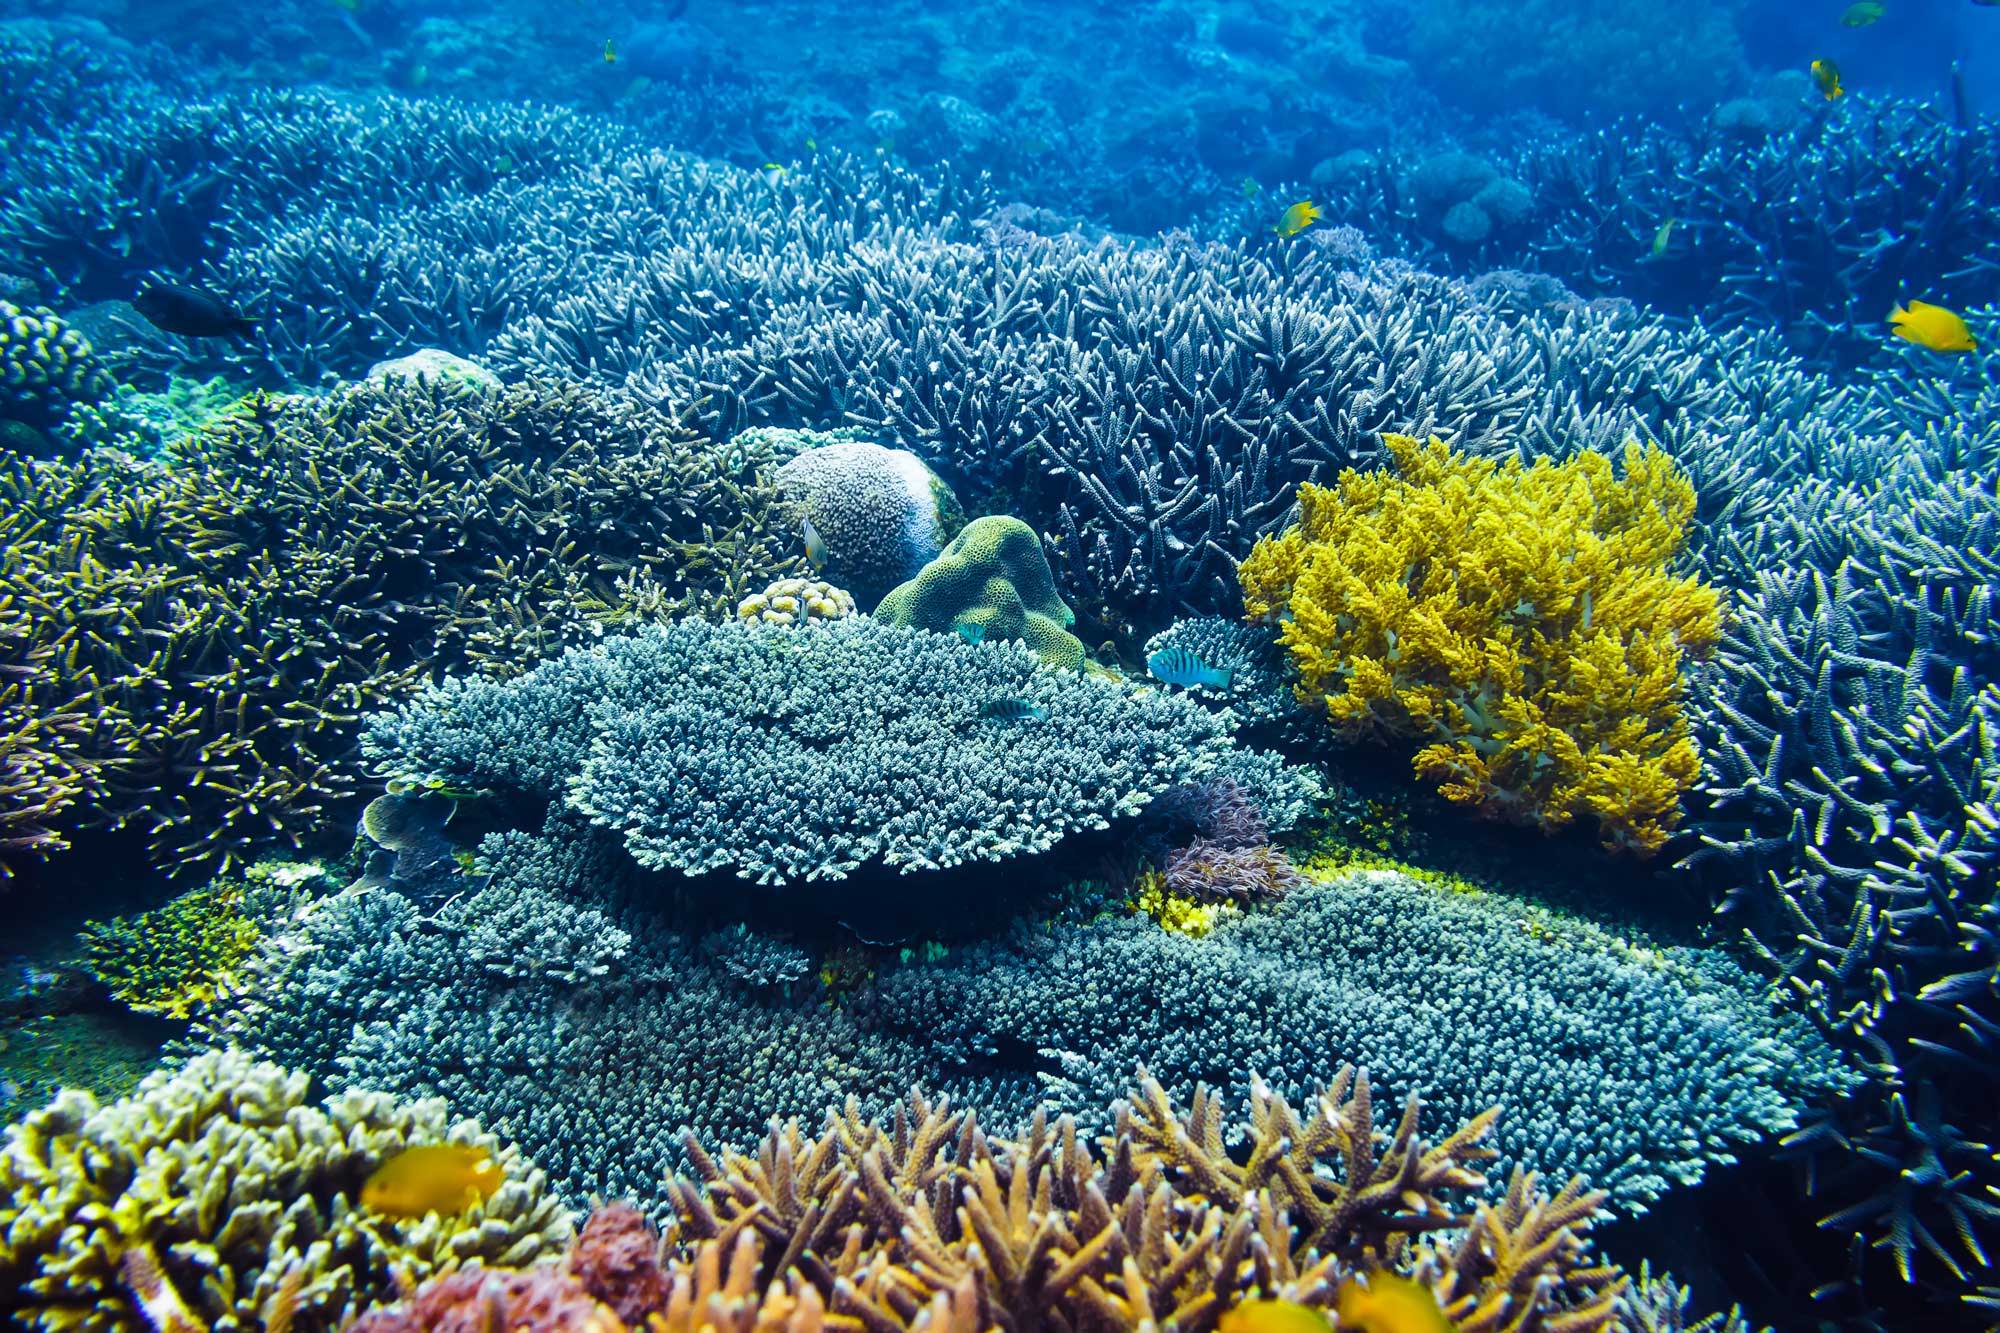 Restoring coral reefs benefits entire ecosystems and economies